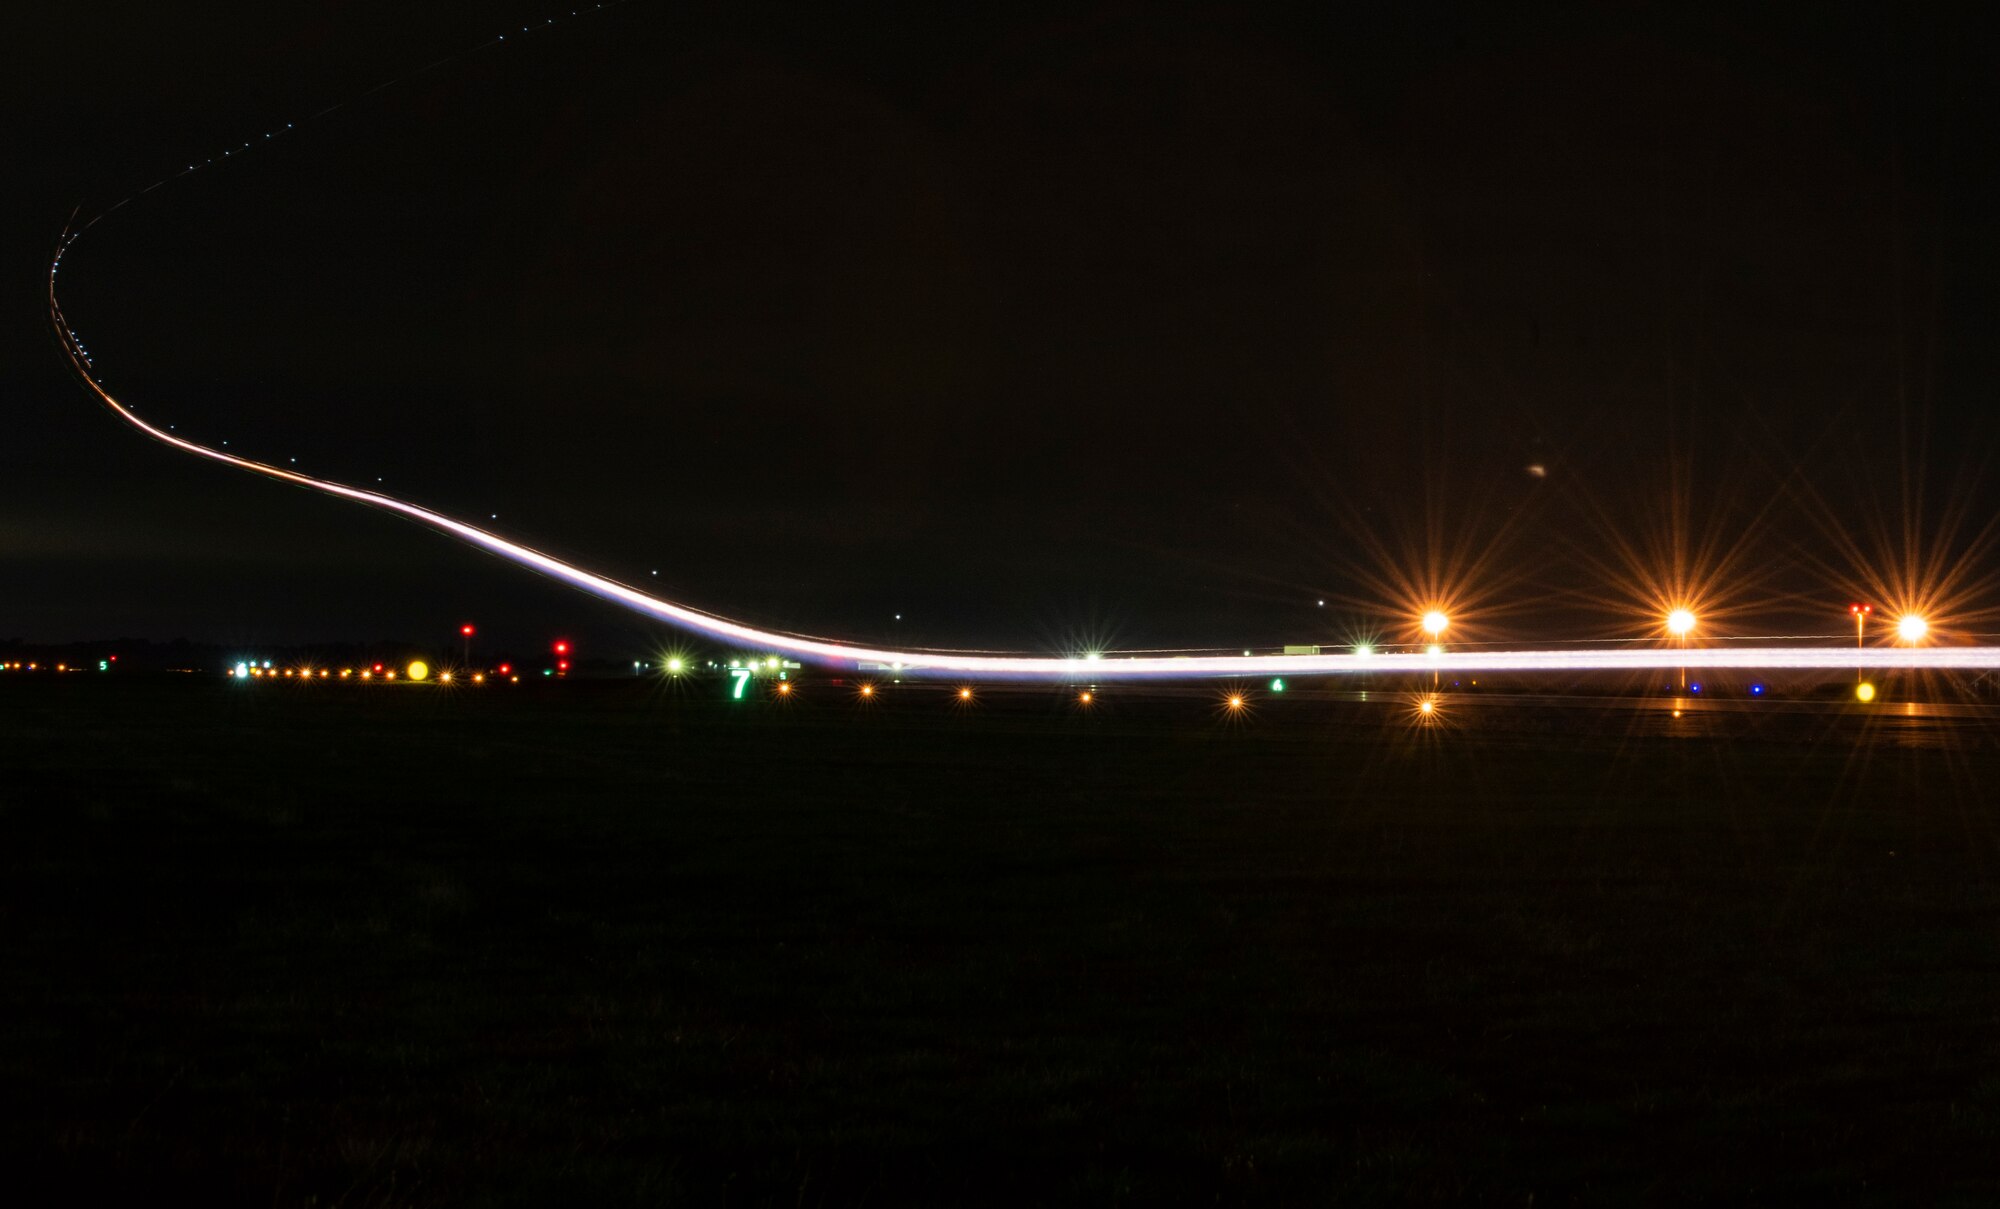 A U.S. Air Force F-15C Eagle, assigned to the 493rd Fighter Squadron, takes off at Royal Air Force Lakenheath, England, Sept. 8, 2020. Night Flying Exercises provide 48th Fighter Wing aircrew and support personnel the experience needed to maintain a ready force capable of ensuring the collective defence of the NATO alliance. (U.S. Air Force photo by Airman 1st Class Jessi Monte)